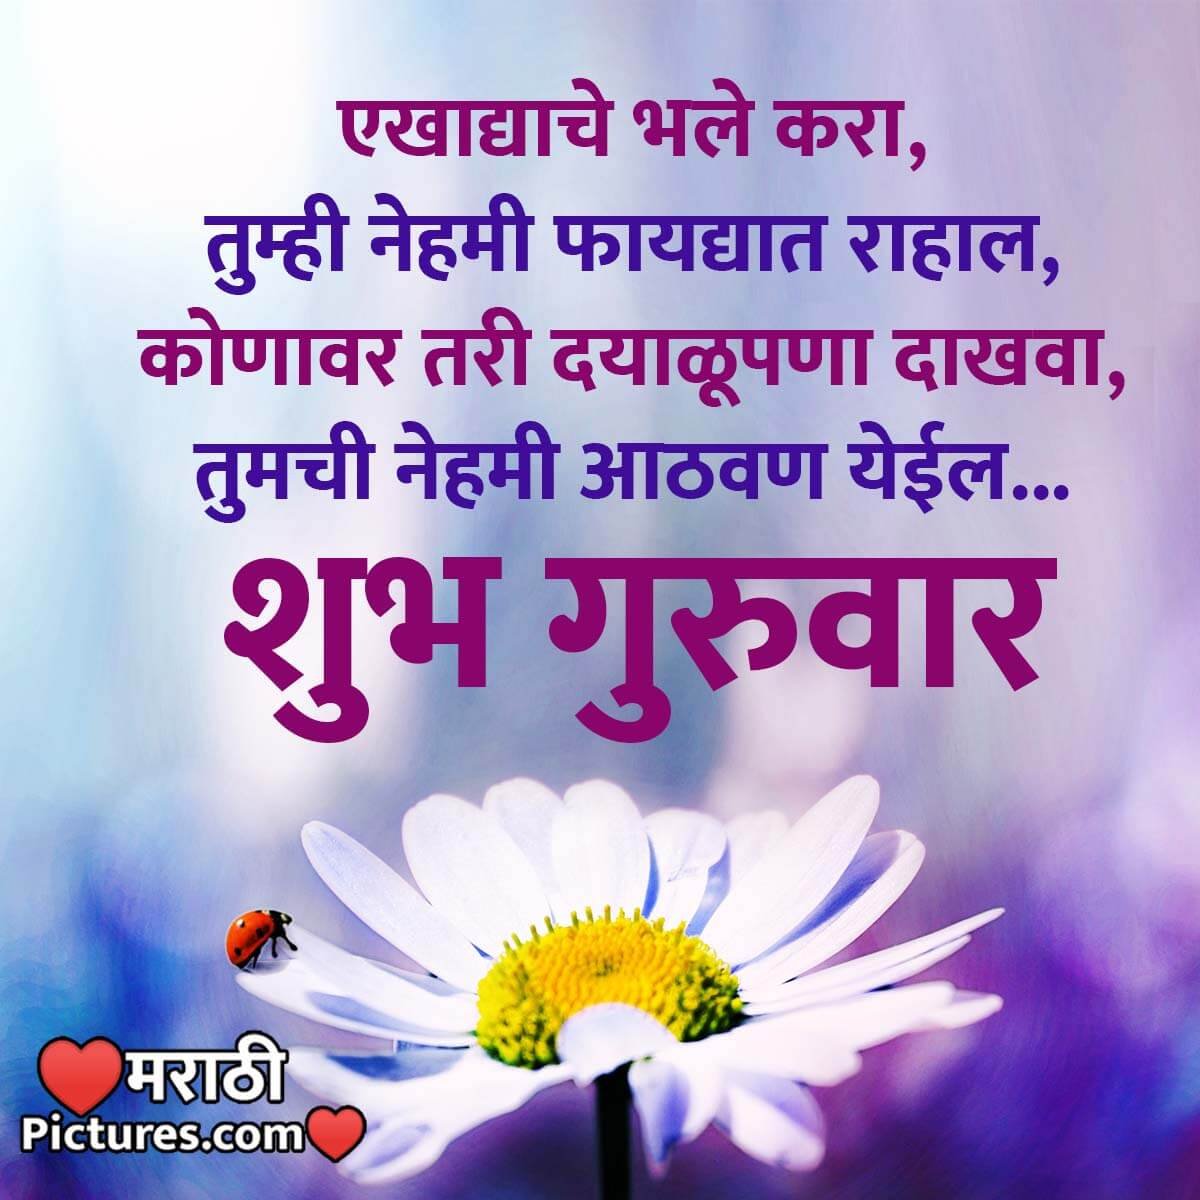 Thursday Marathi Quotes And Messages